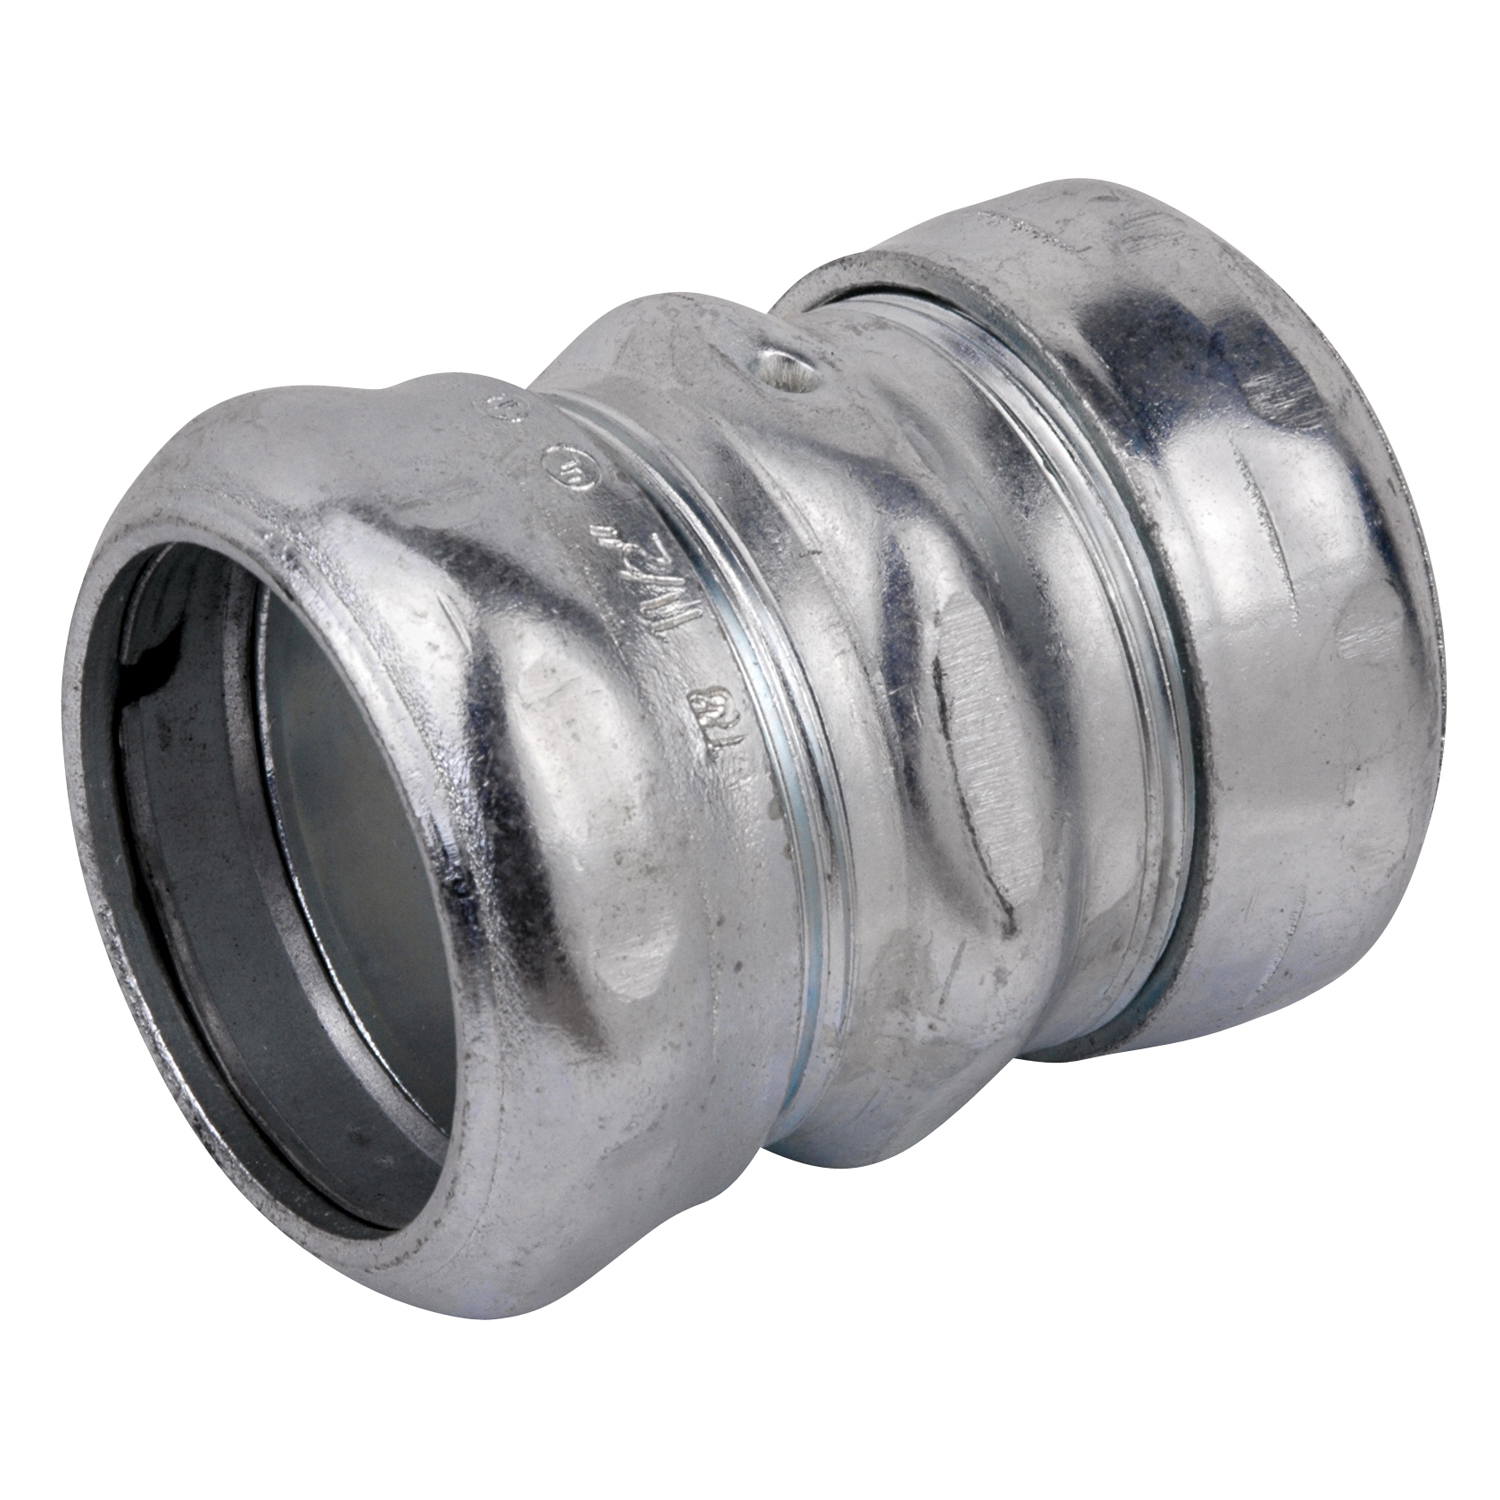 Thomas & Betts TK115A Steel City Compression Coupling